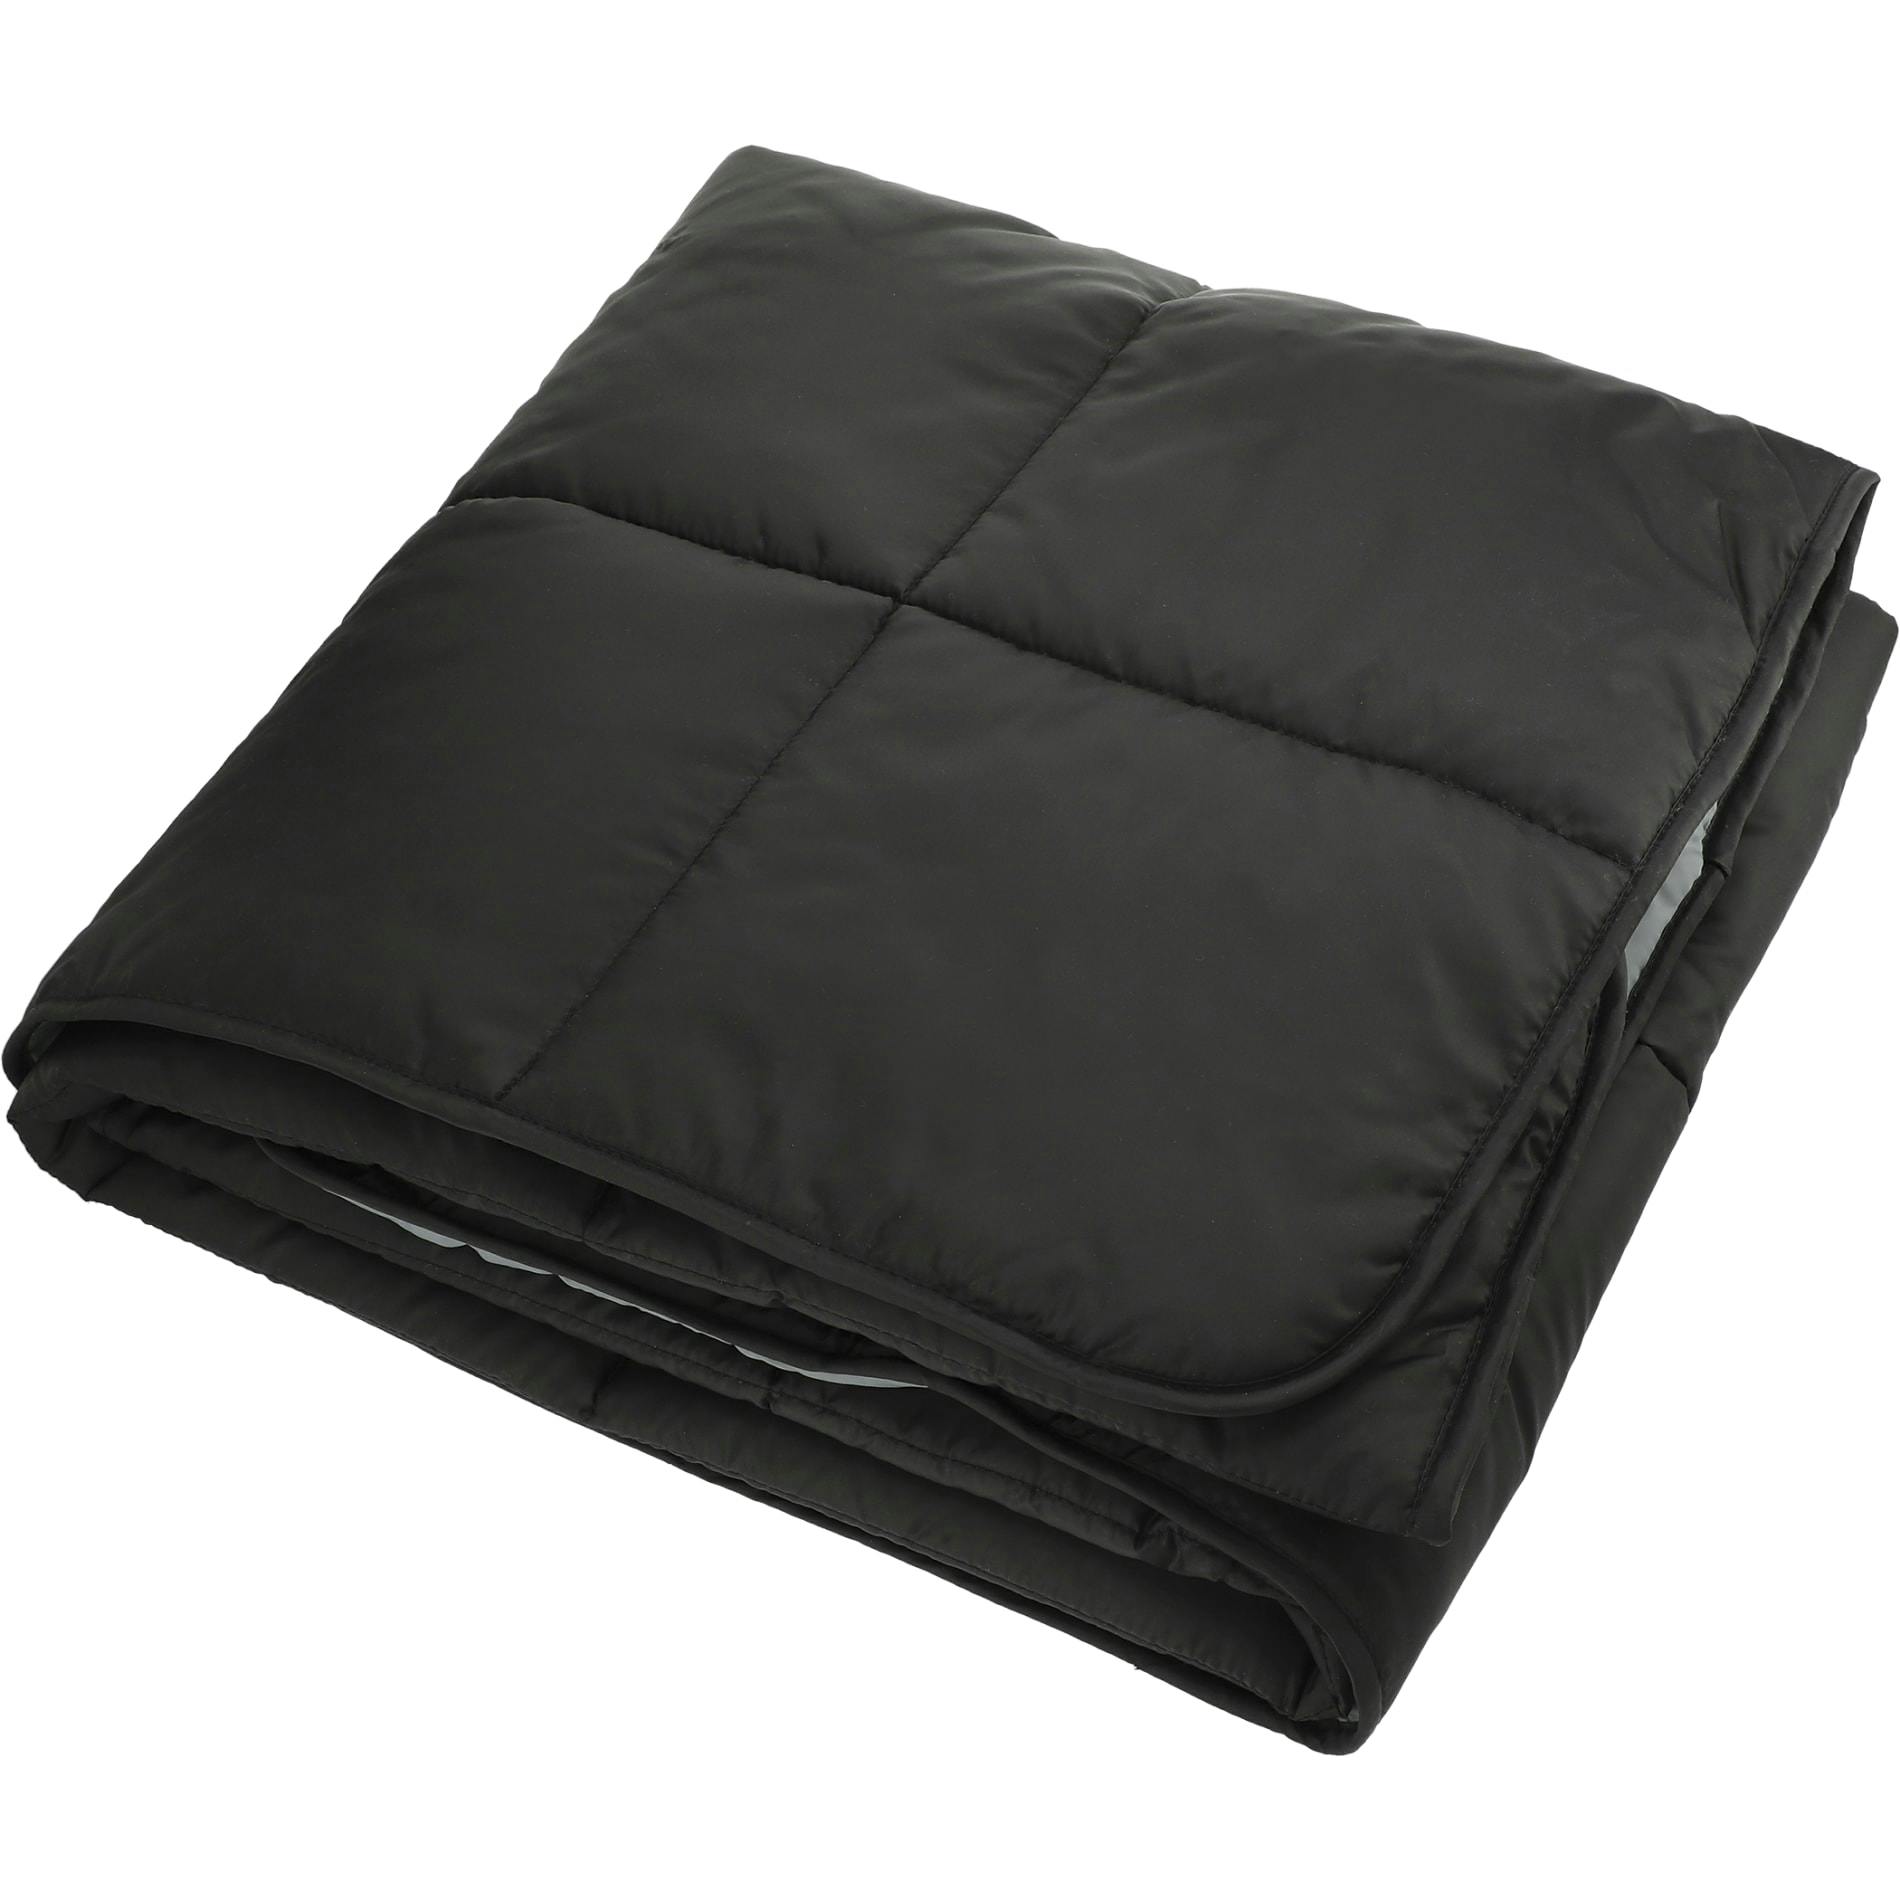 Puffy Outdoor Blanket - additional Image 1